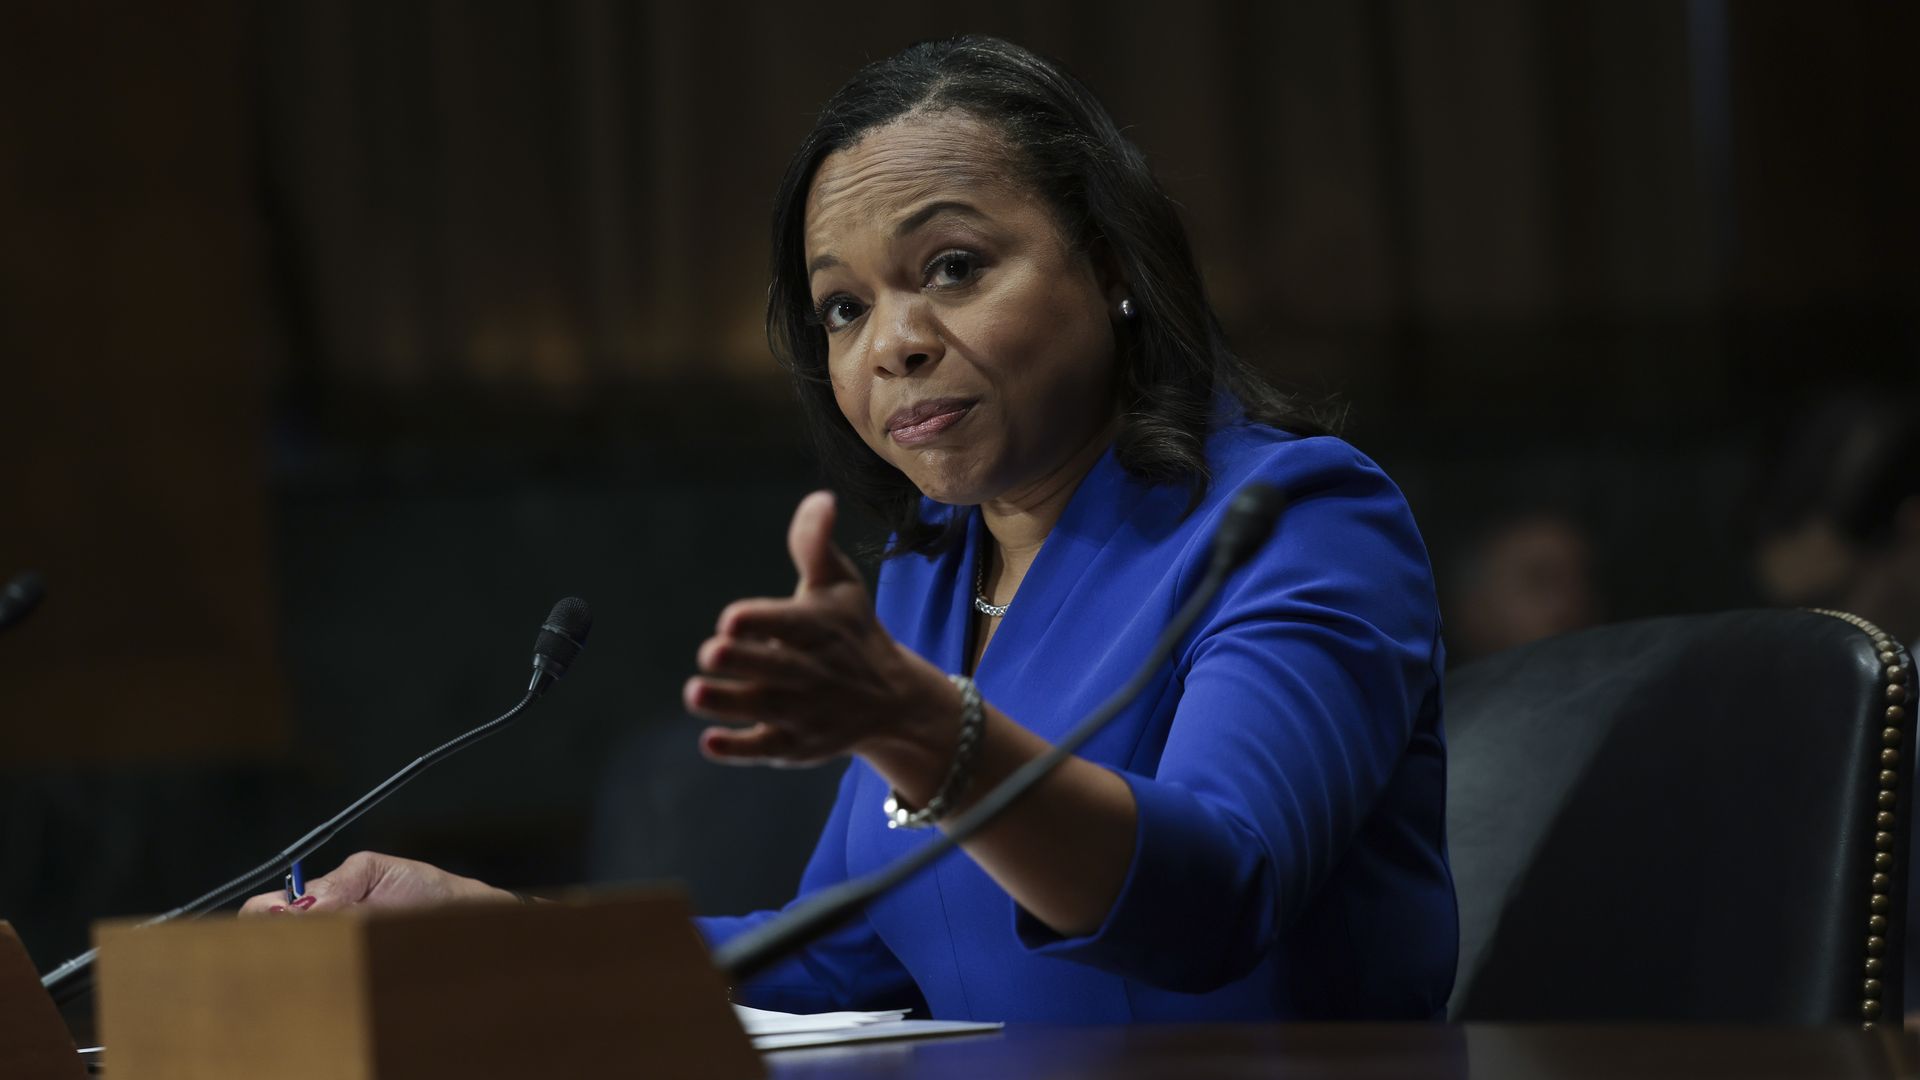 Assistant Attorney General Kristen Clarke testifies before the Senate Judiciary Committee at the Dirksen Senate Office Building in Washington, DC.